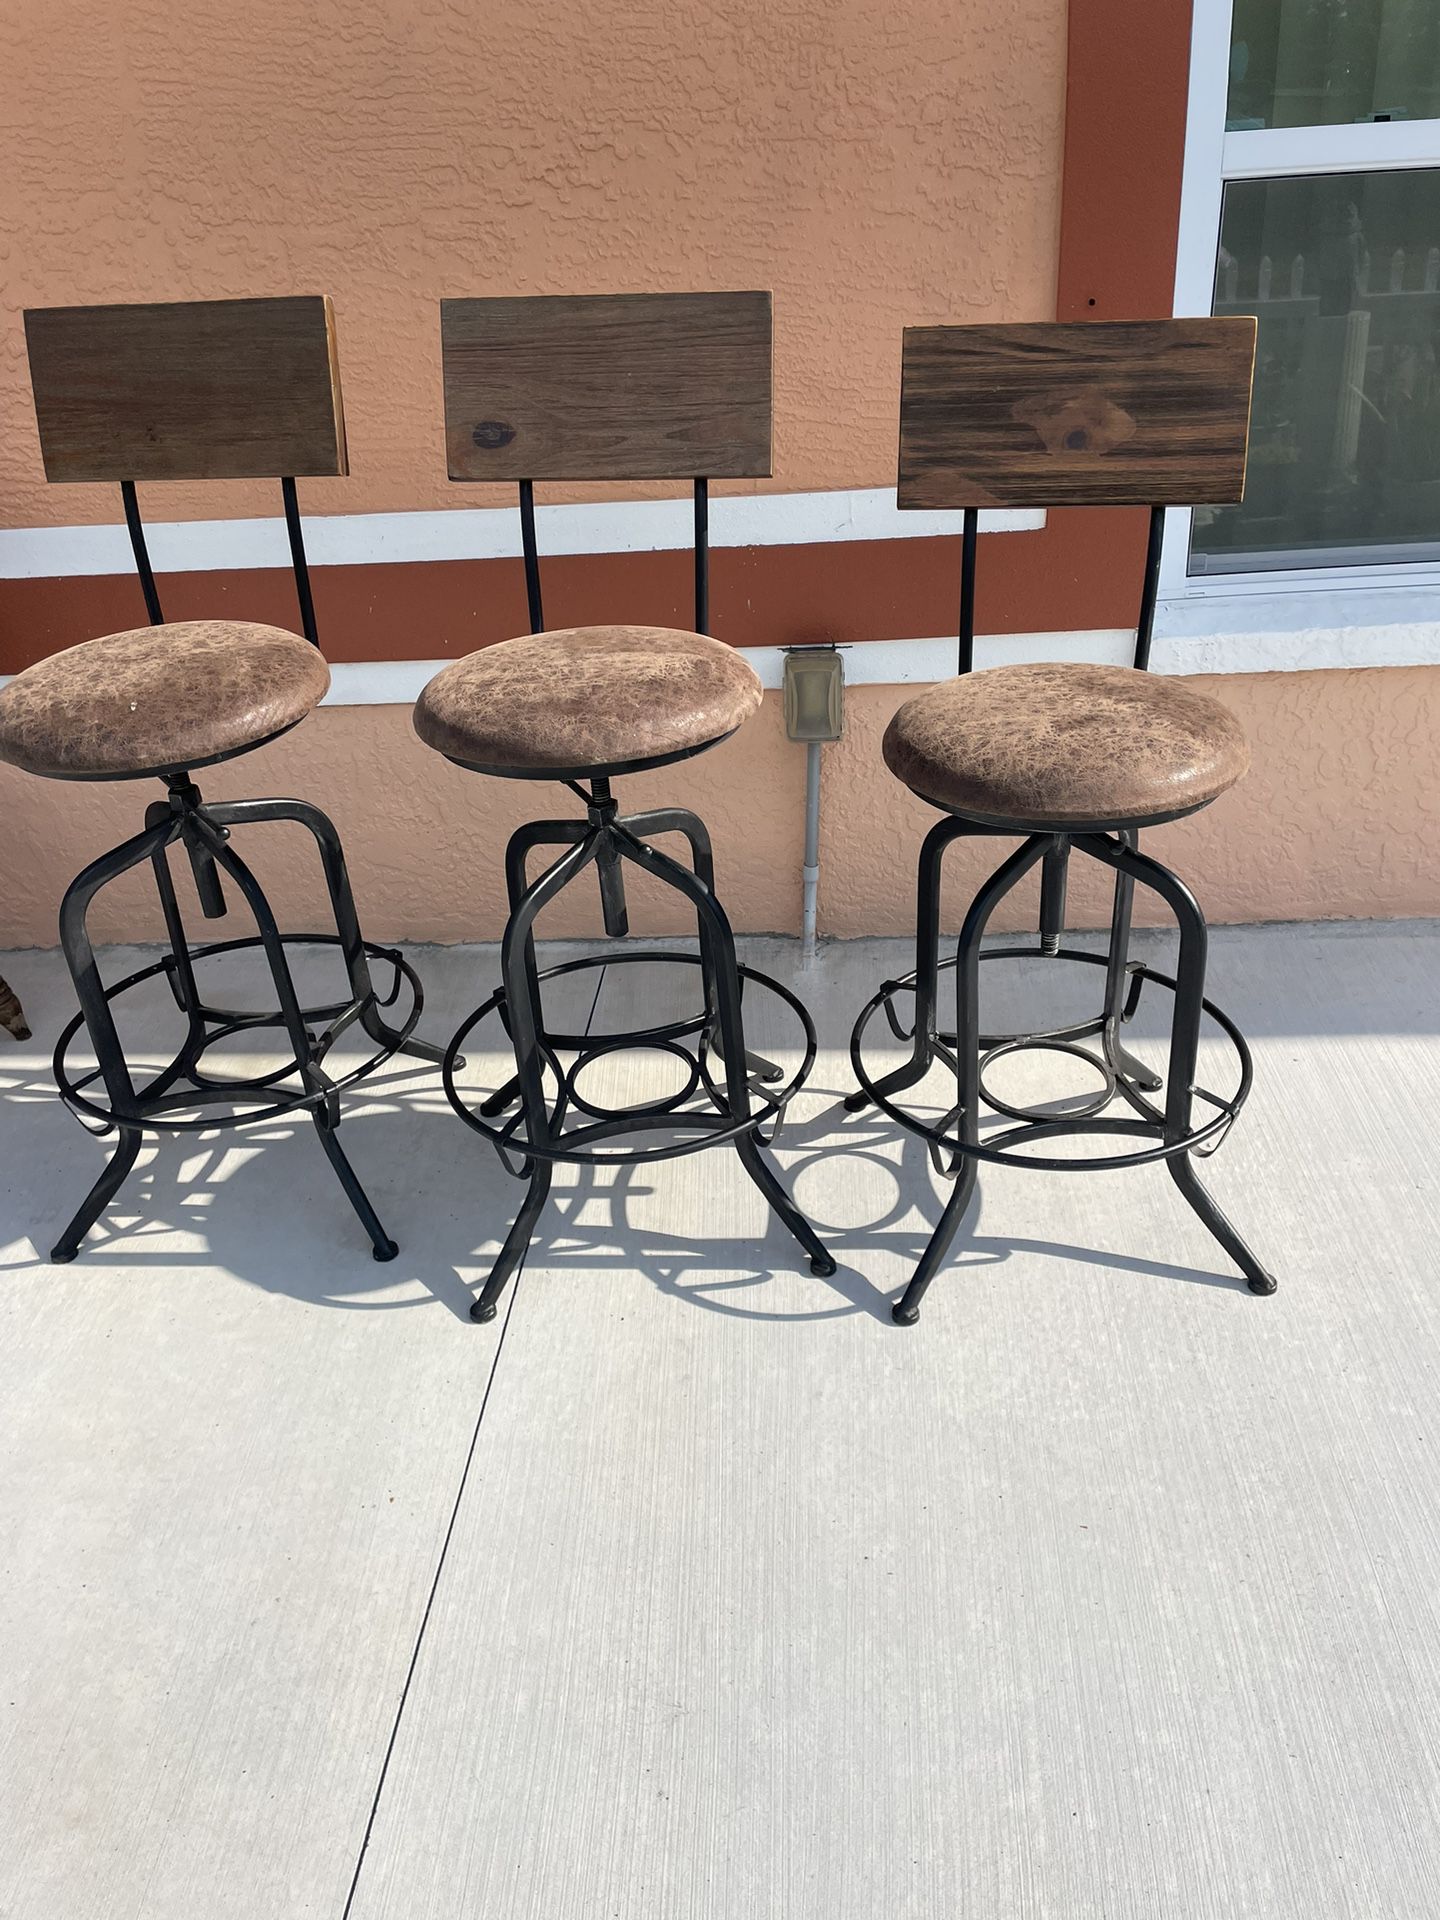 3 high chairs that can be adapted to different sizes, very strong and rotate and you can also put them fixed, they are made of metal, wood and leather